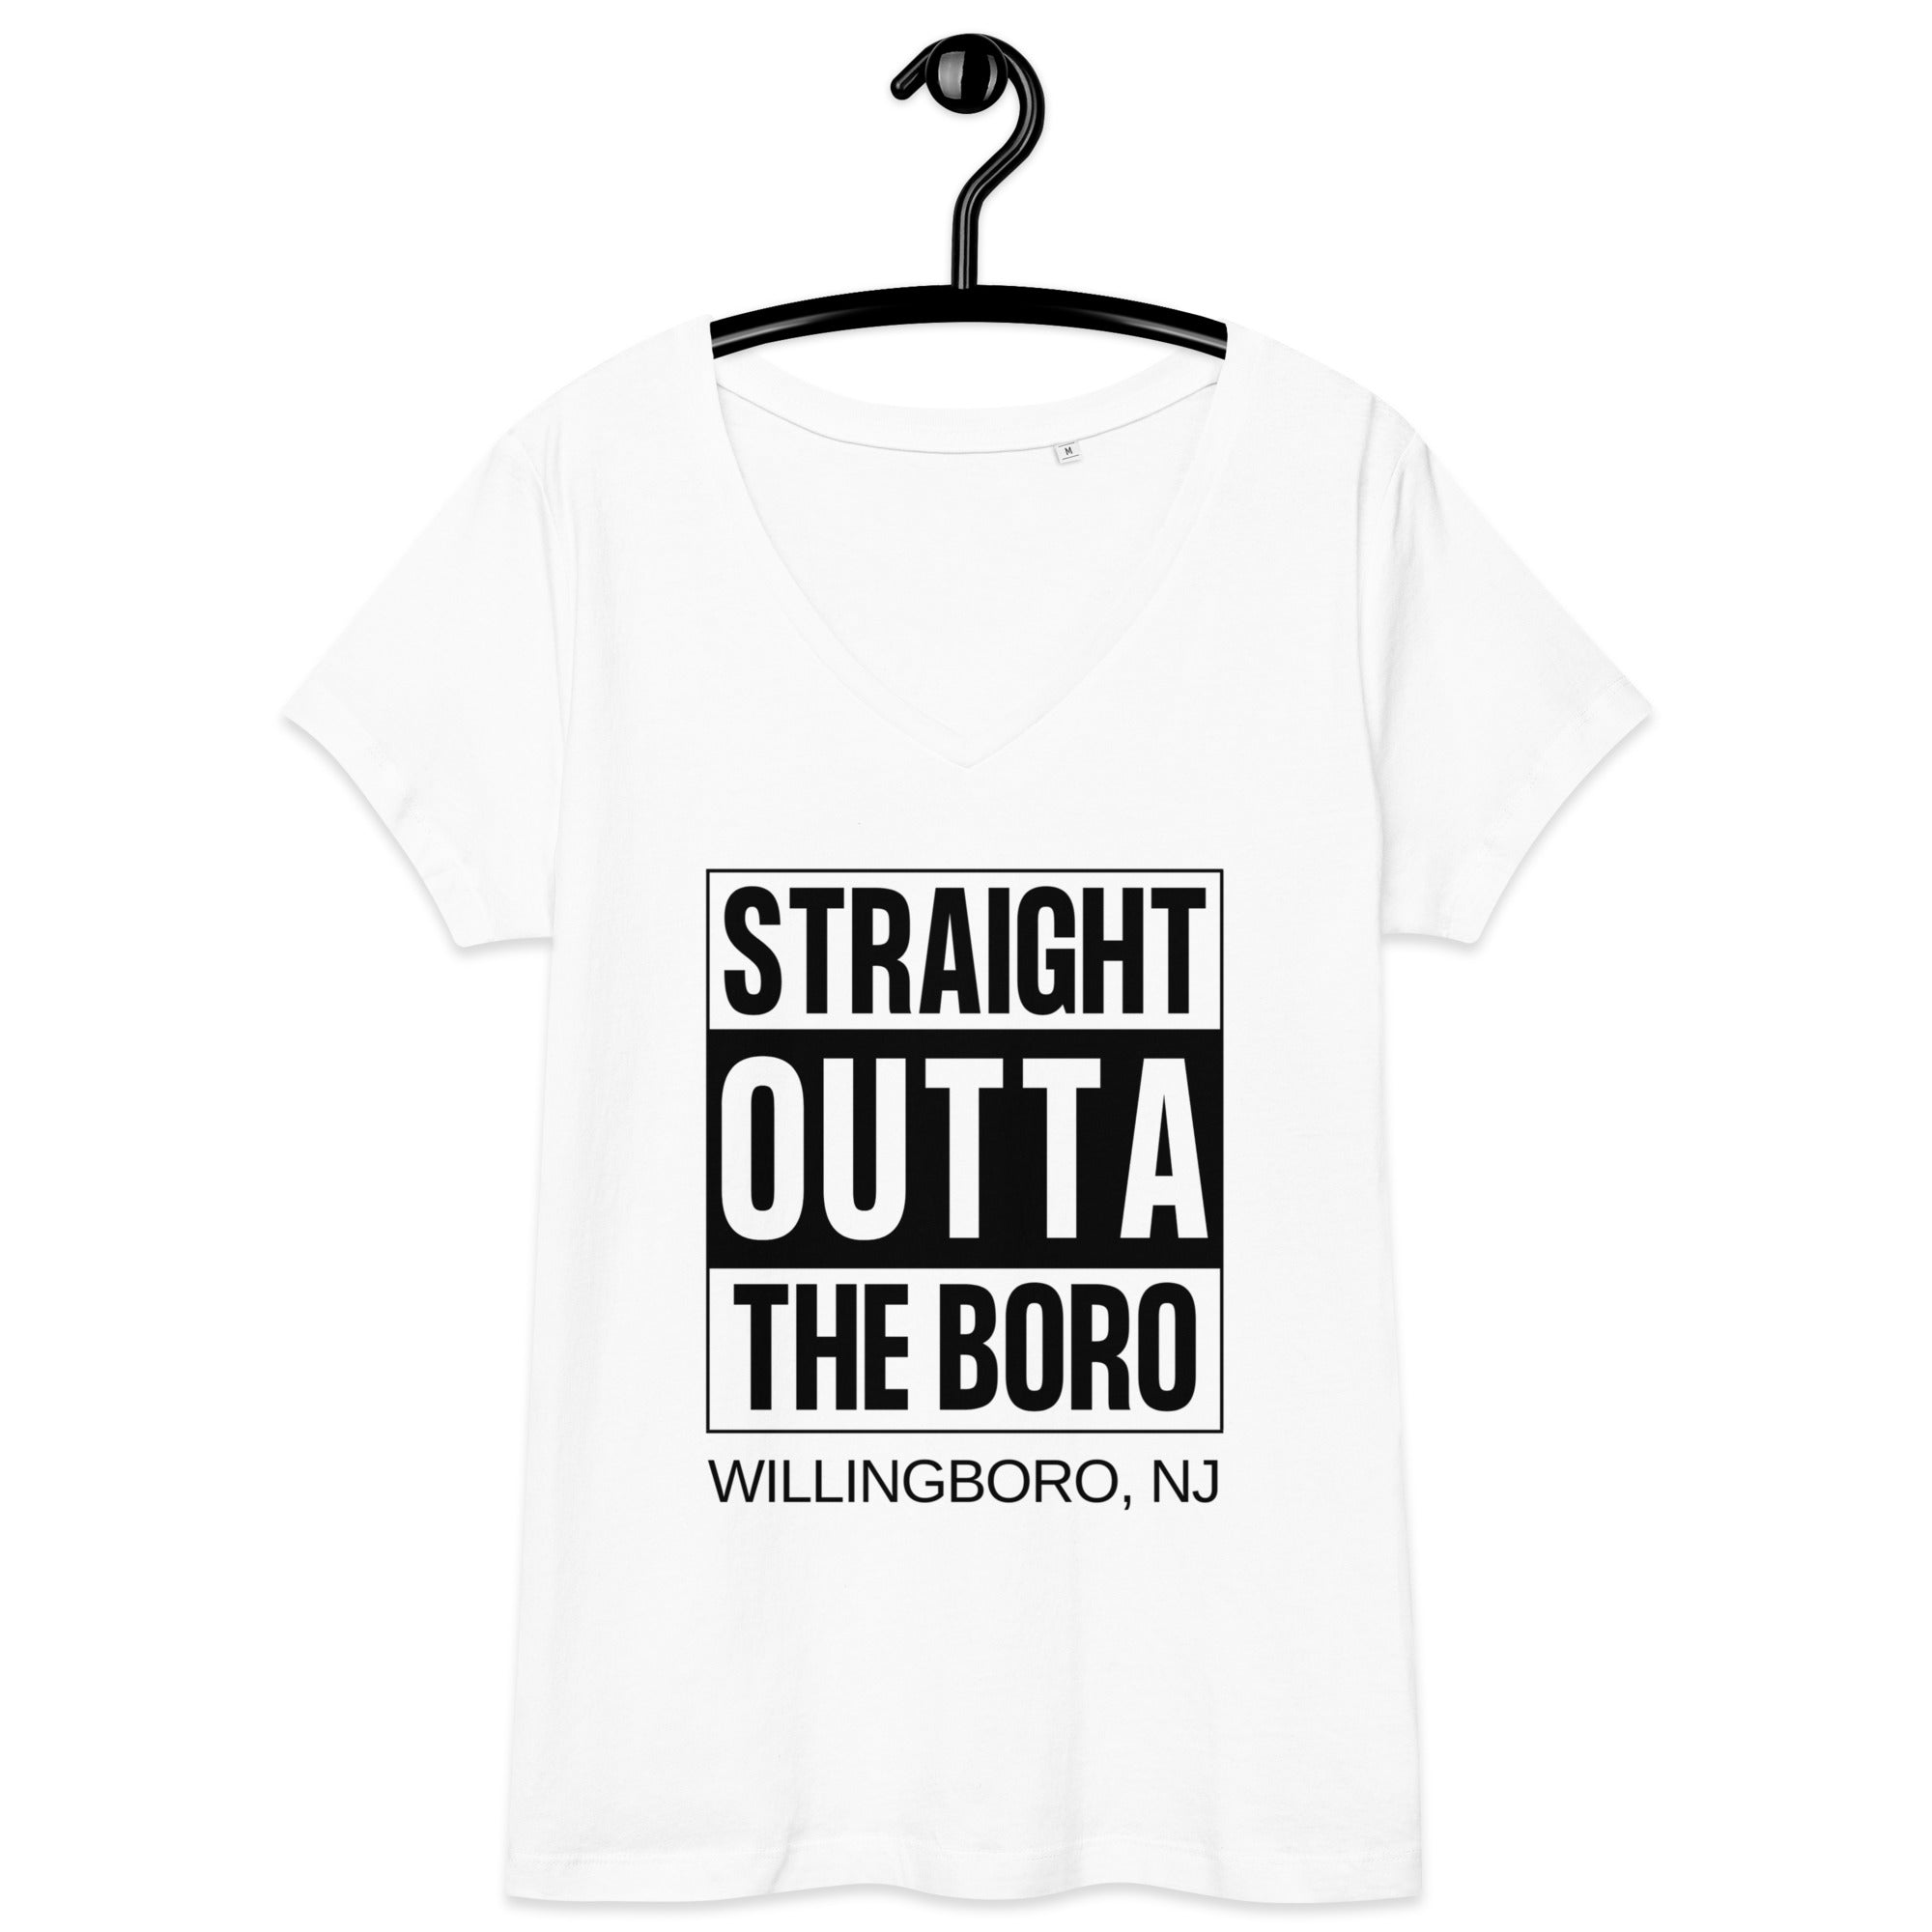 Straight Outta The Boro Women’s fitted v-neck t-shirt